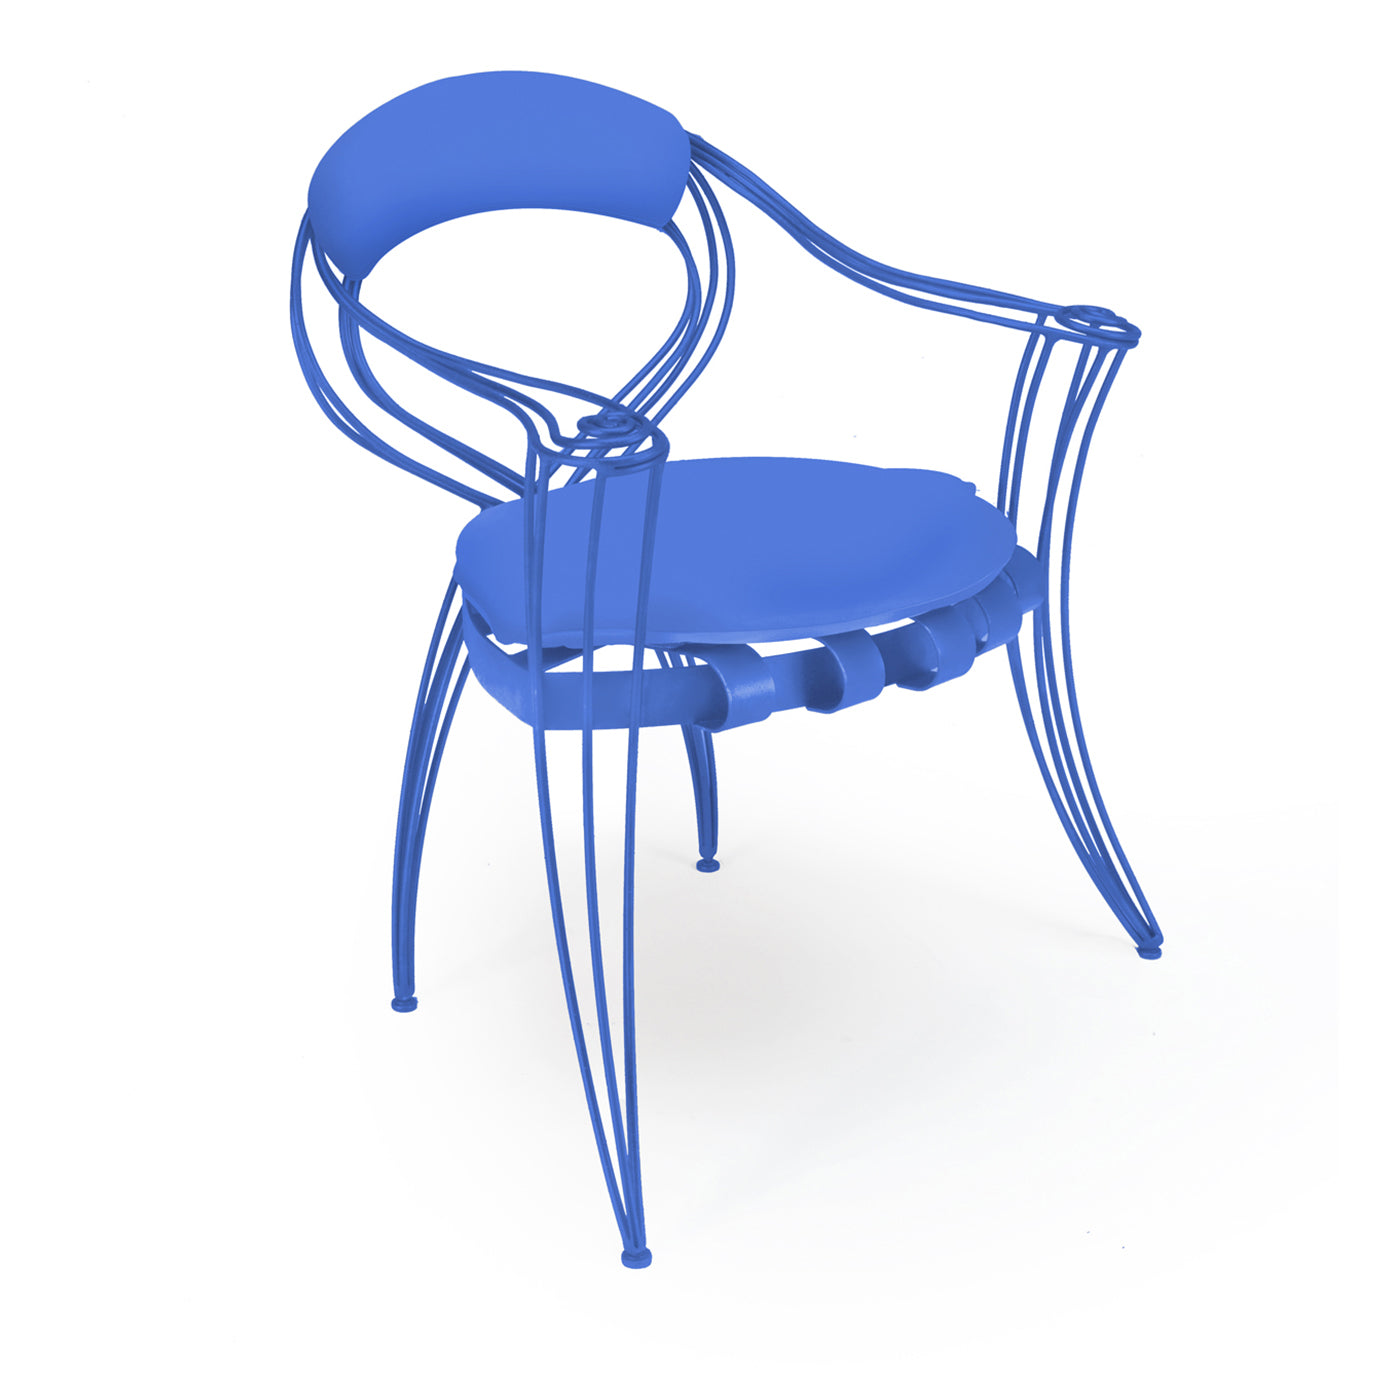 Opus Garden Blue Chair with Armrests by Carlo Rampazzi - Alternative view 1